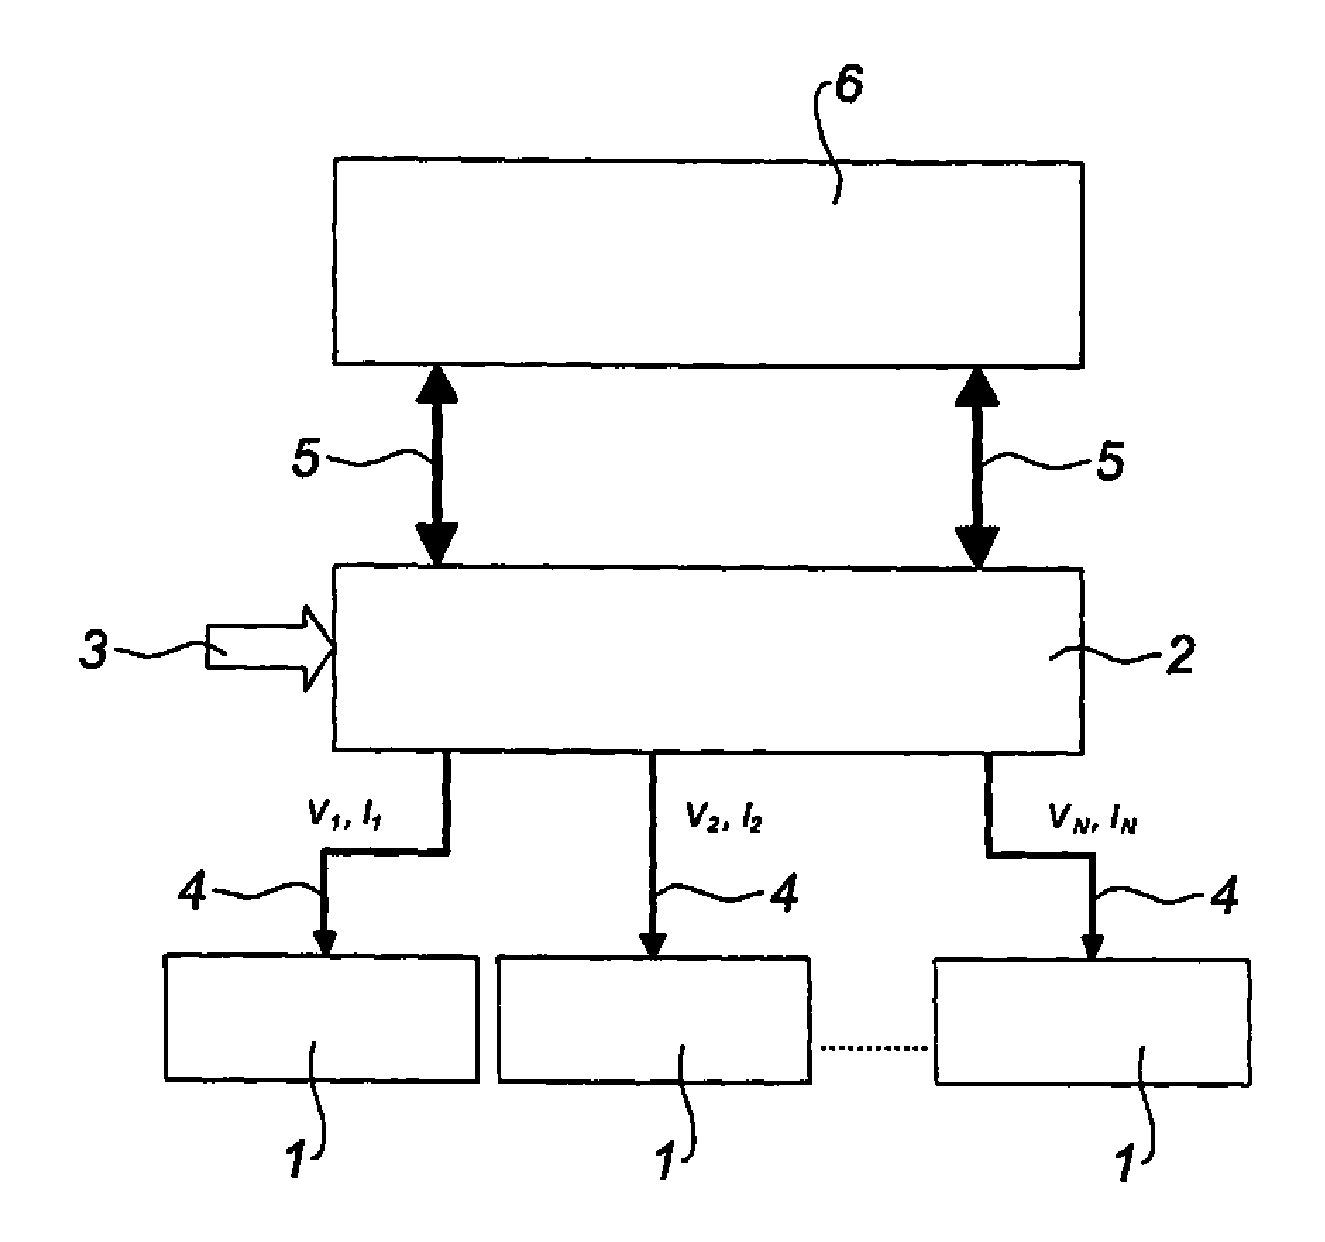 Electric de-icing device and related monitoring system